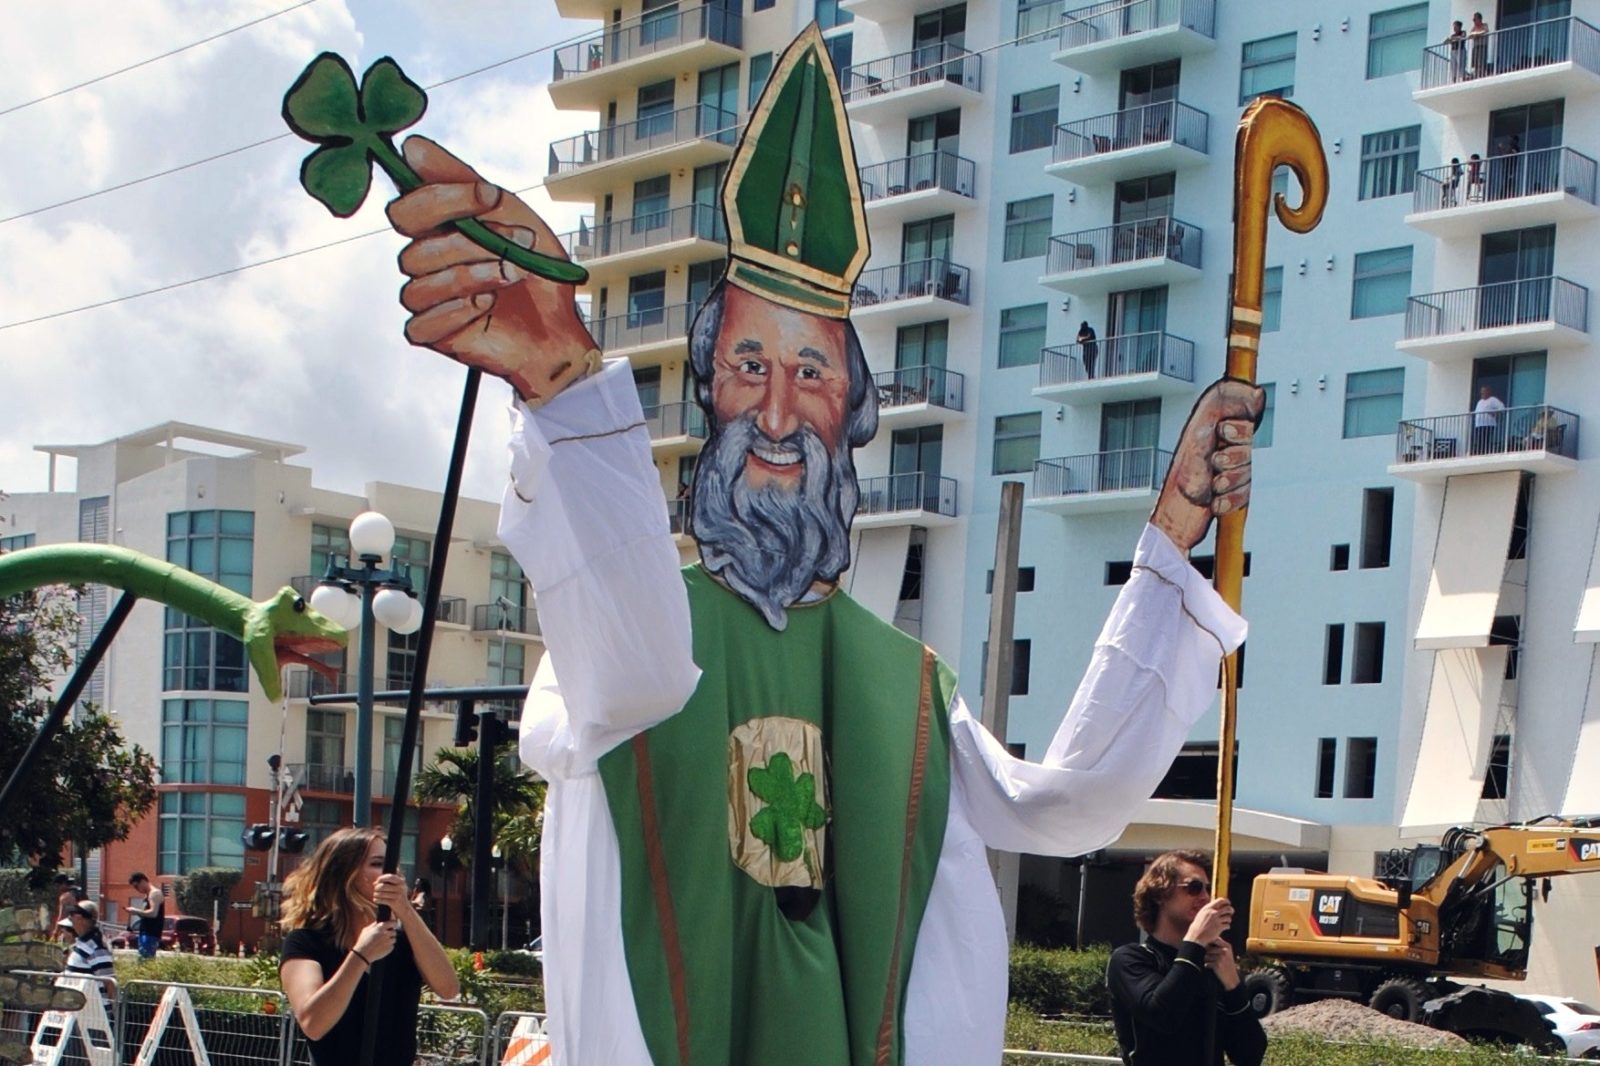 9 Ways to Celebrate St. Patrick's Day at Any Age